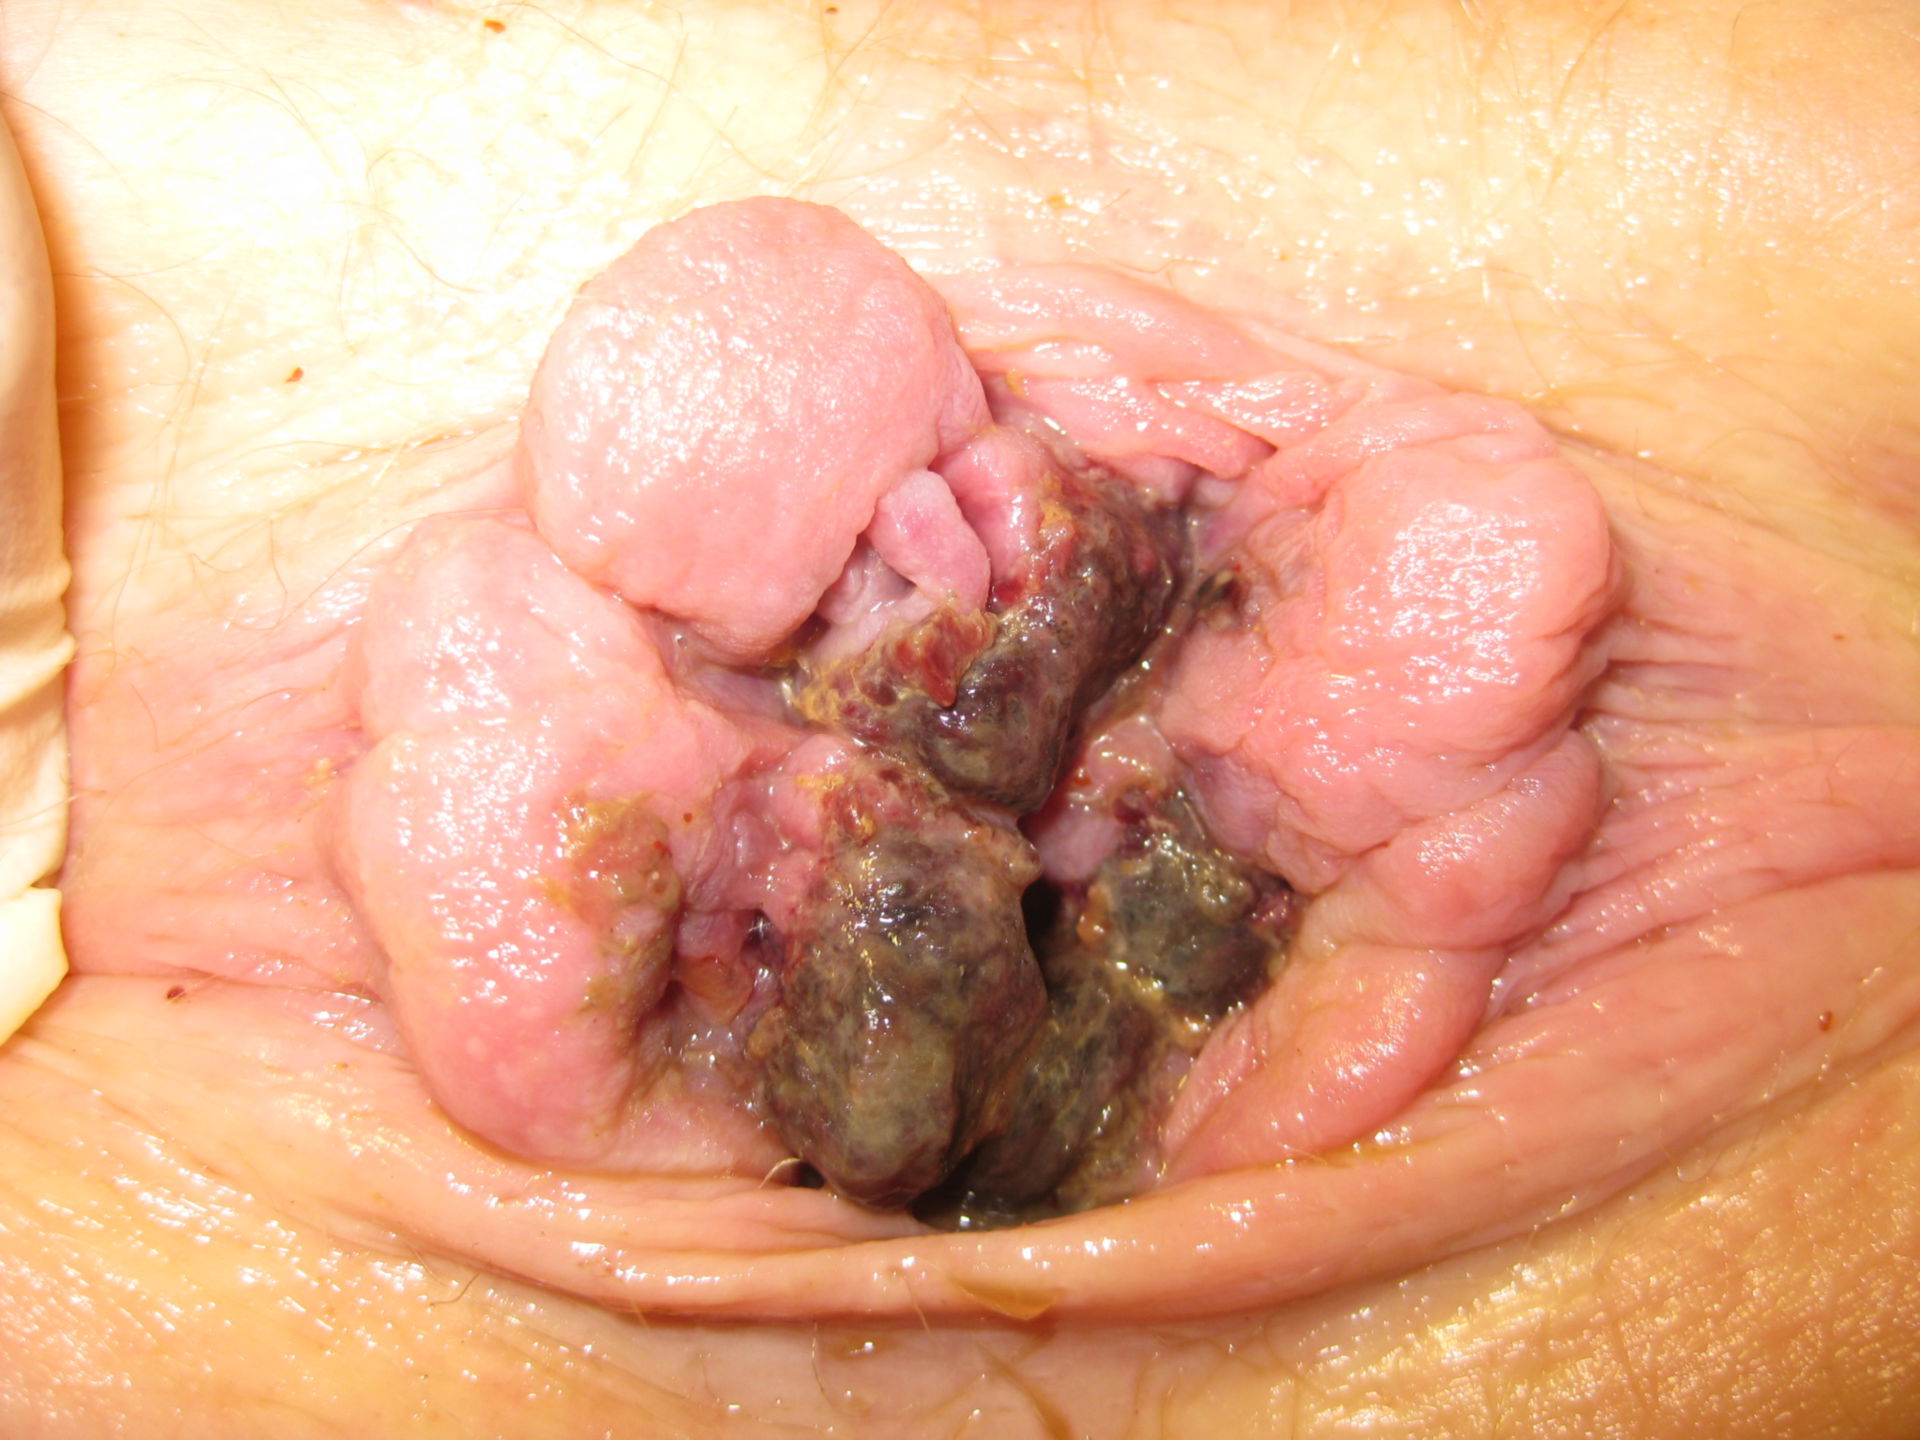 Grade IV hemorrhoids with thrombosis and necrosis